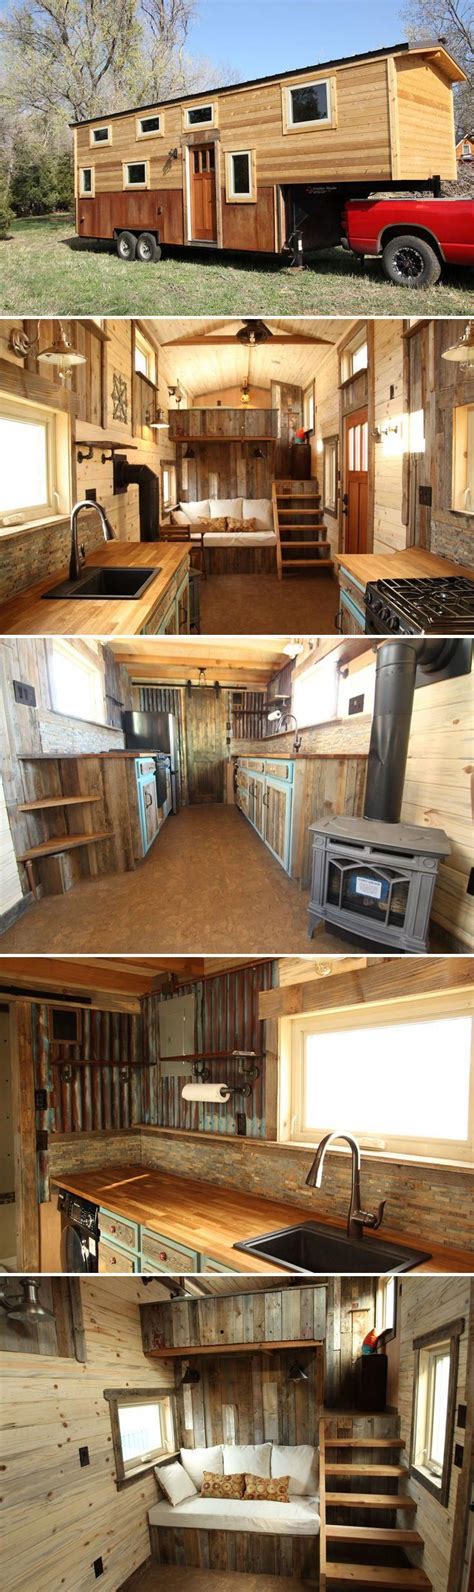 Jjs Place Is A 31 Foot Gooseneck Tiny House Built By Colorado Based